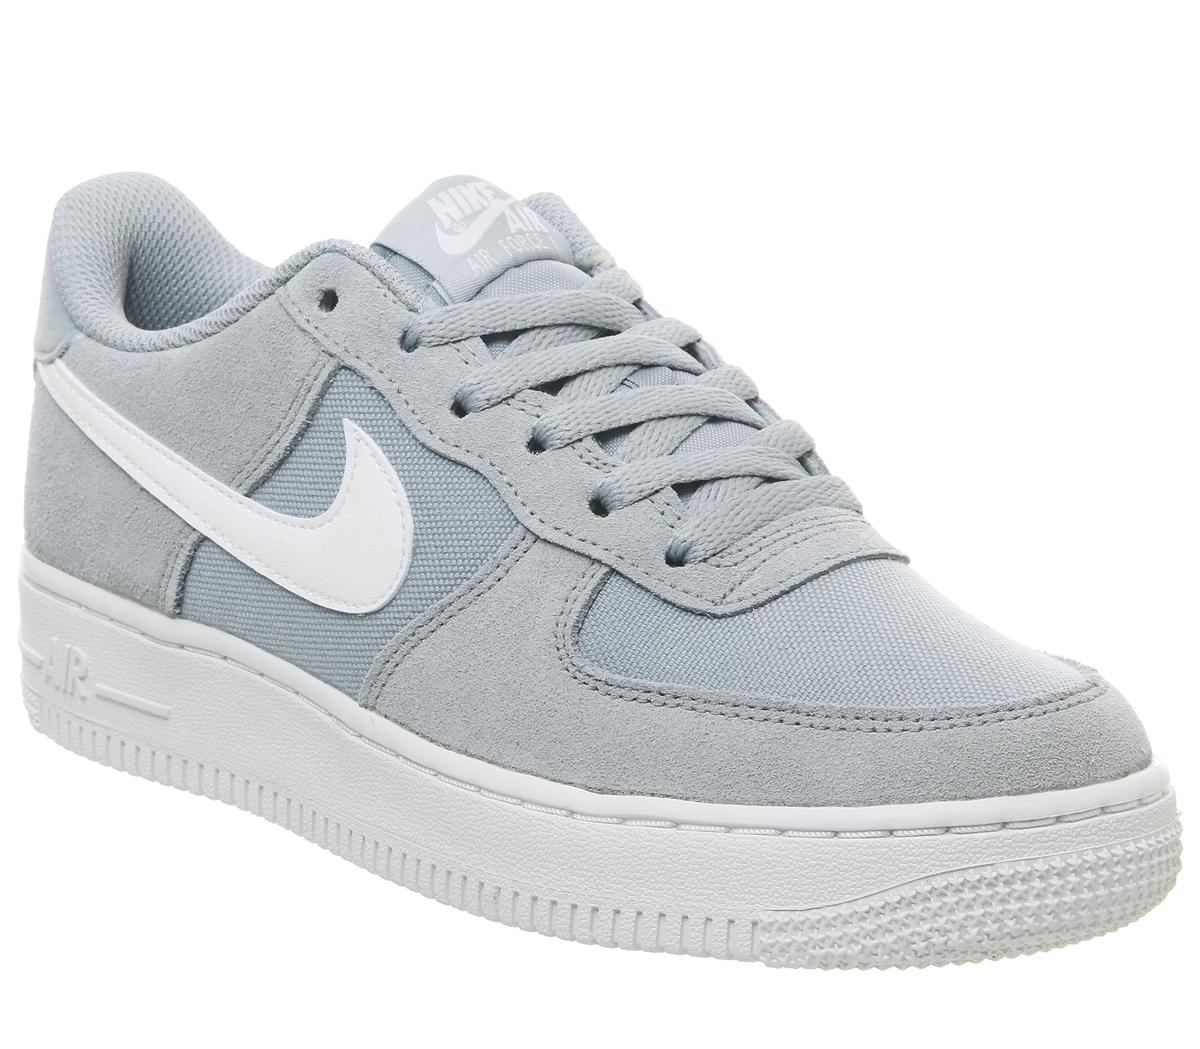 Nike Af1 Boys Trainers Obsidian Mist White - Women's Trainers